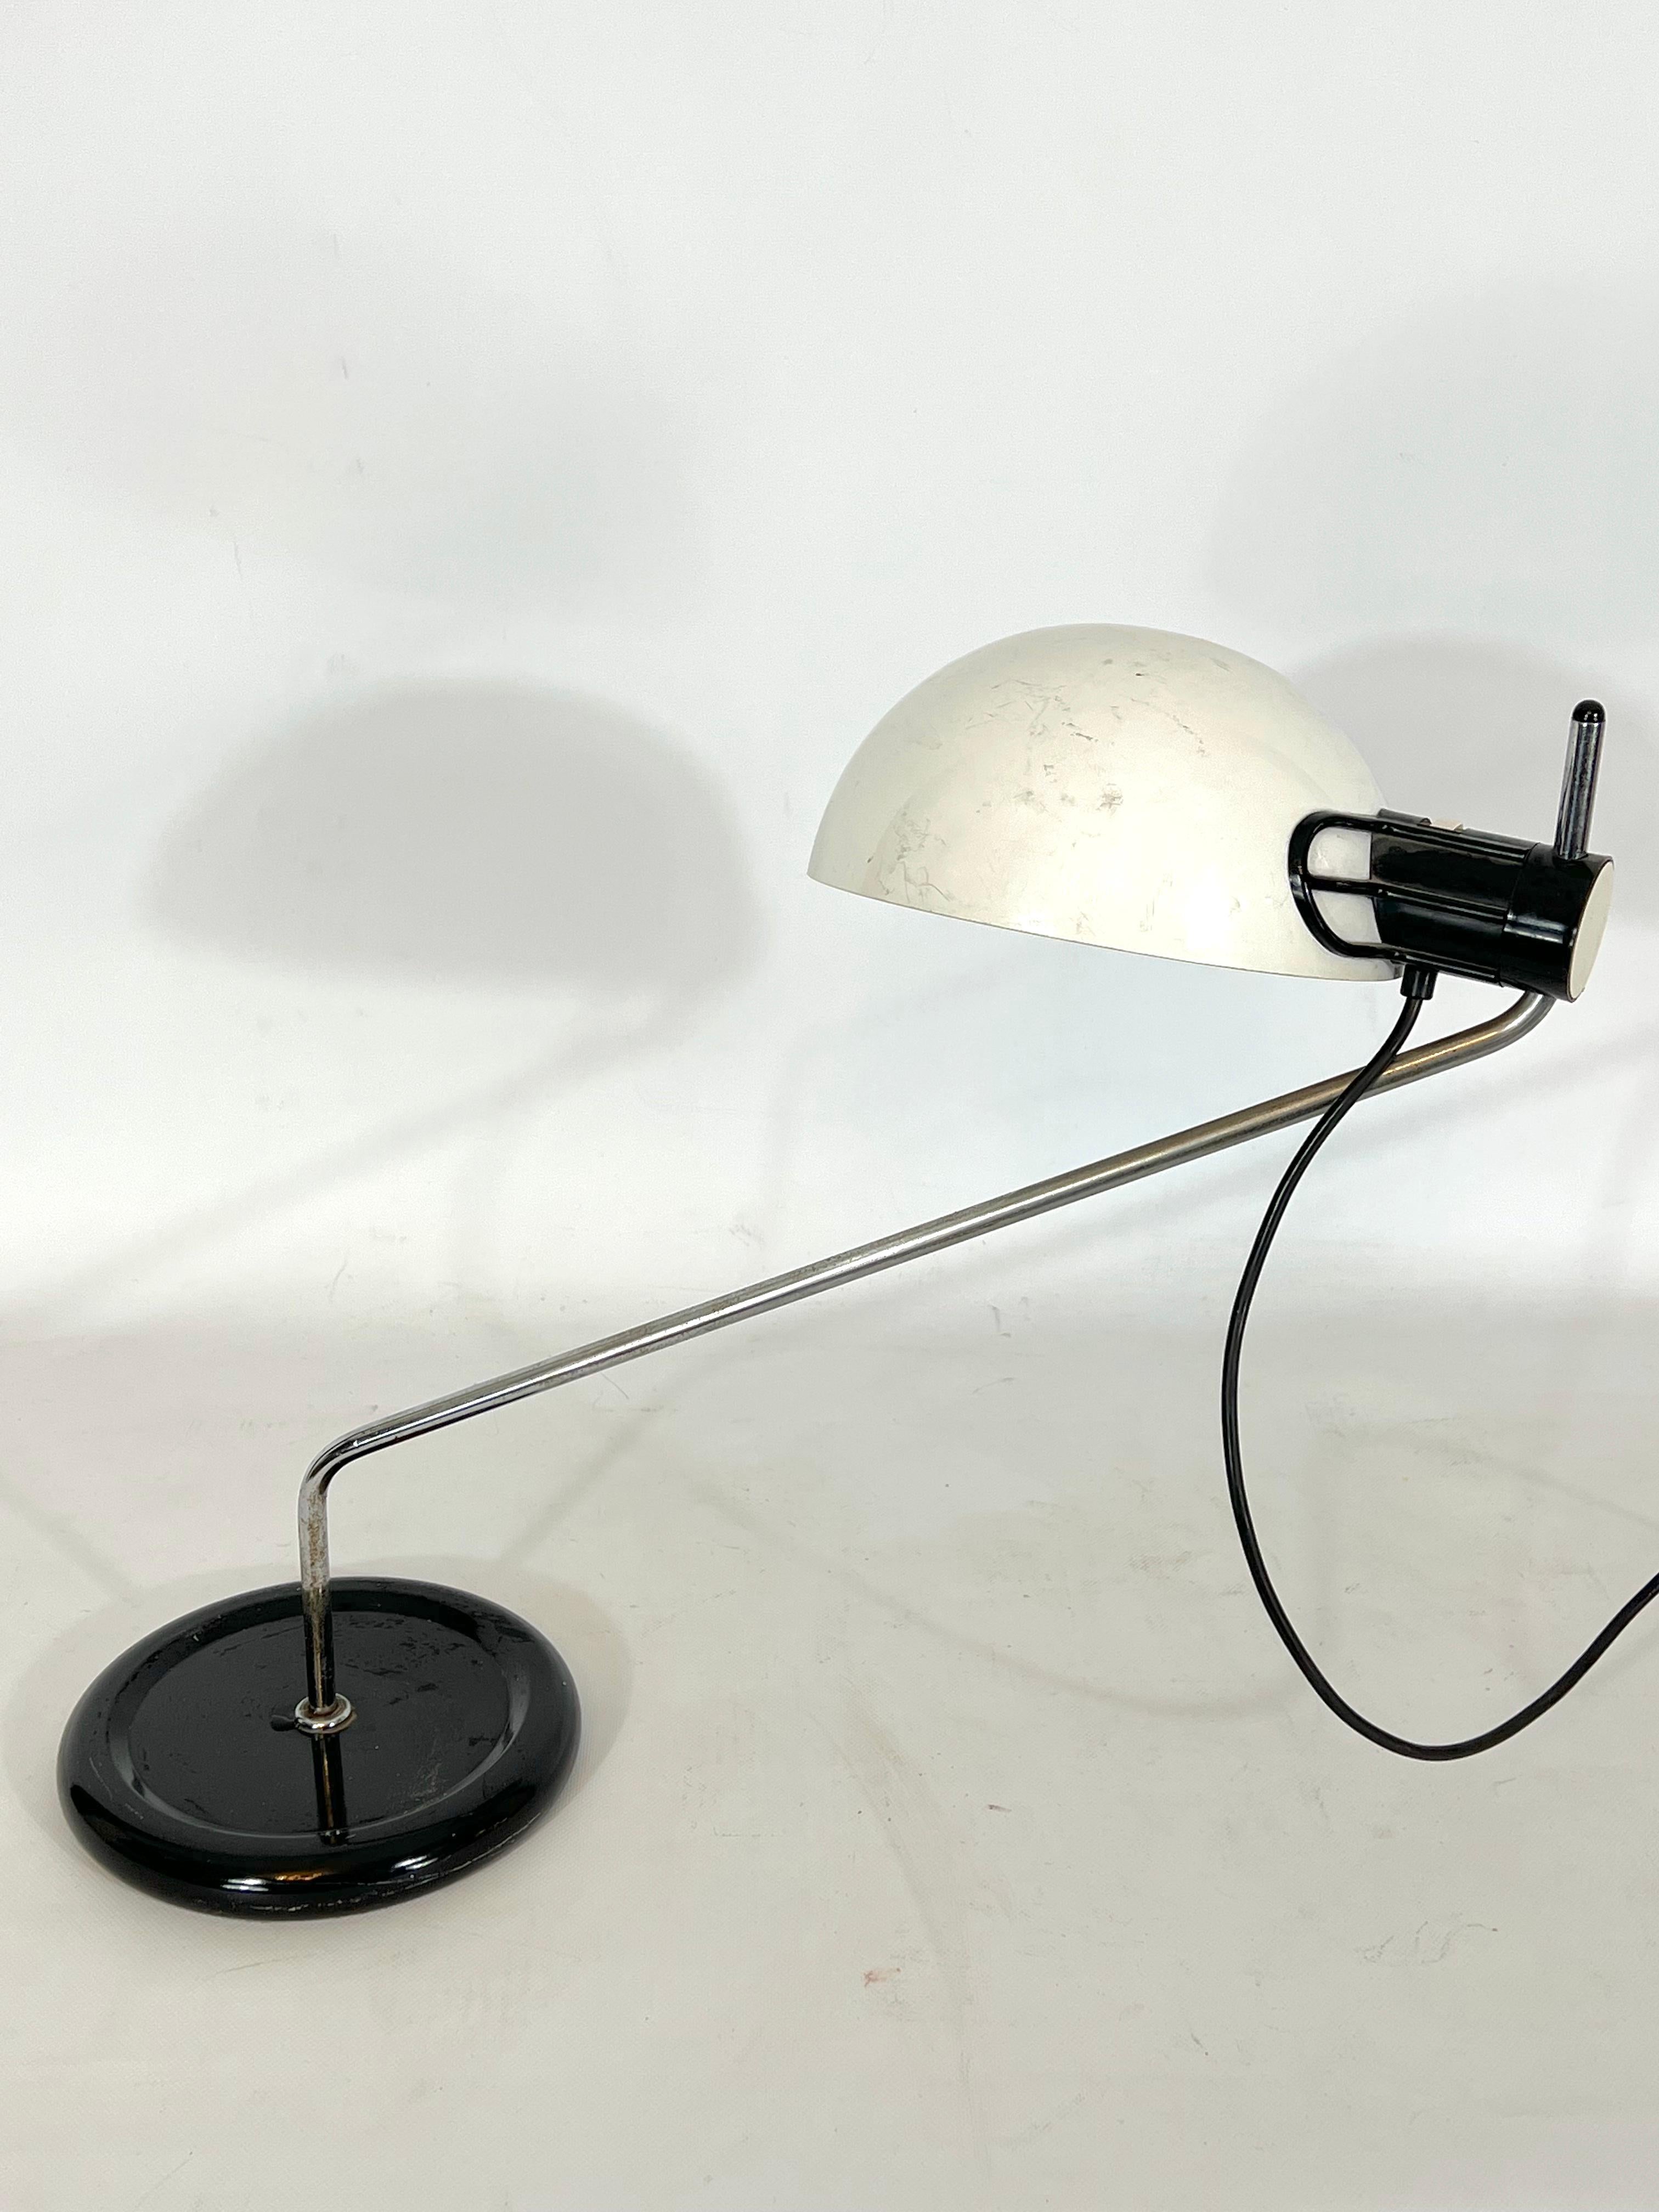 Good vintage condition with trace of age and use for this articulated table lamp produced by Harvey Guzzini during the 70s. Full working with EU standard, adaptable on demand for USA standard.